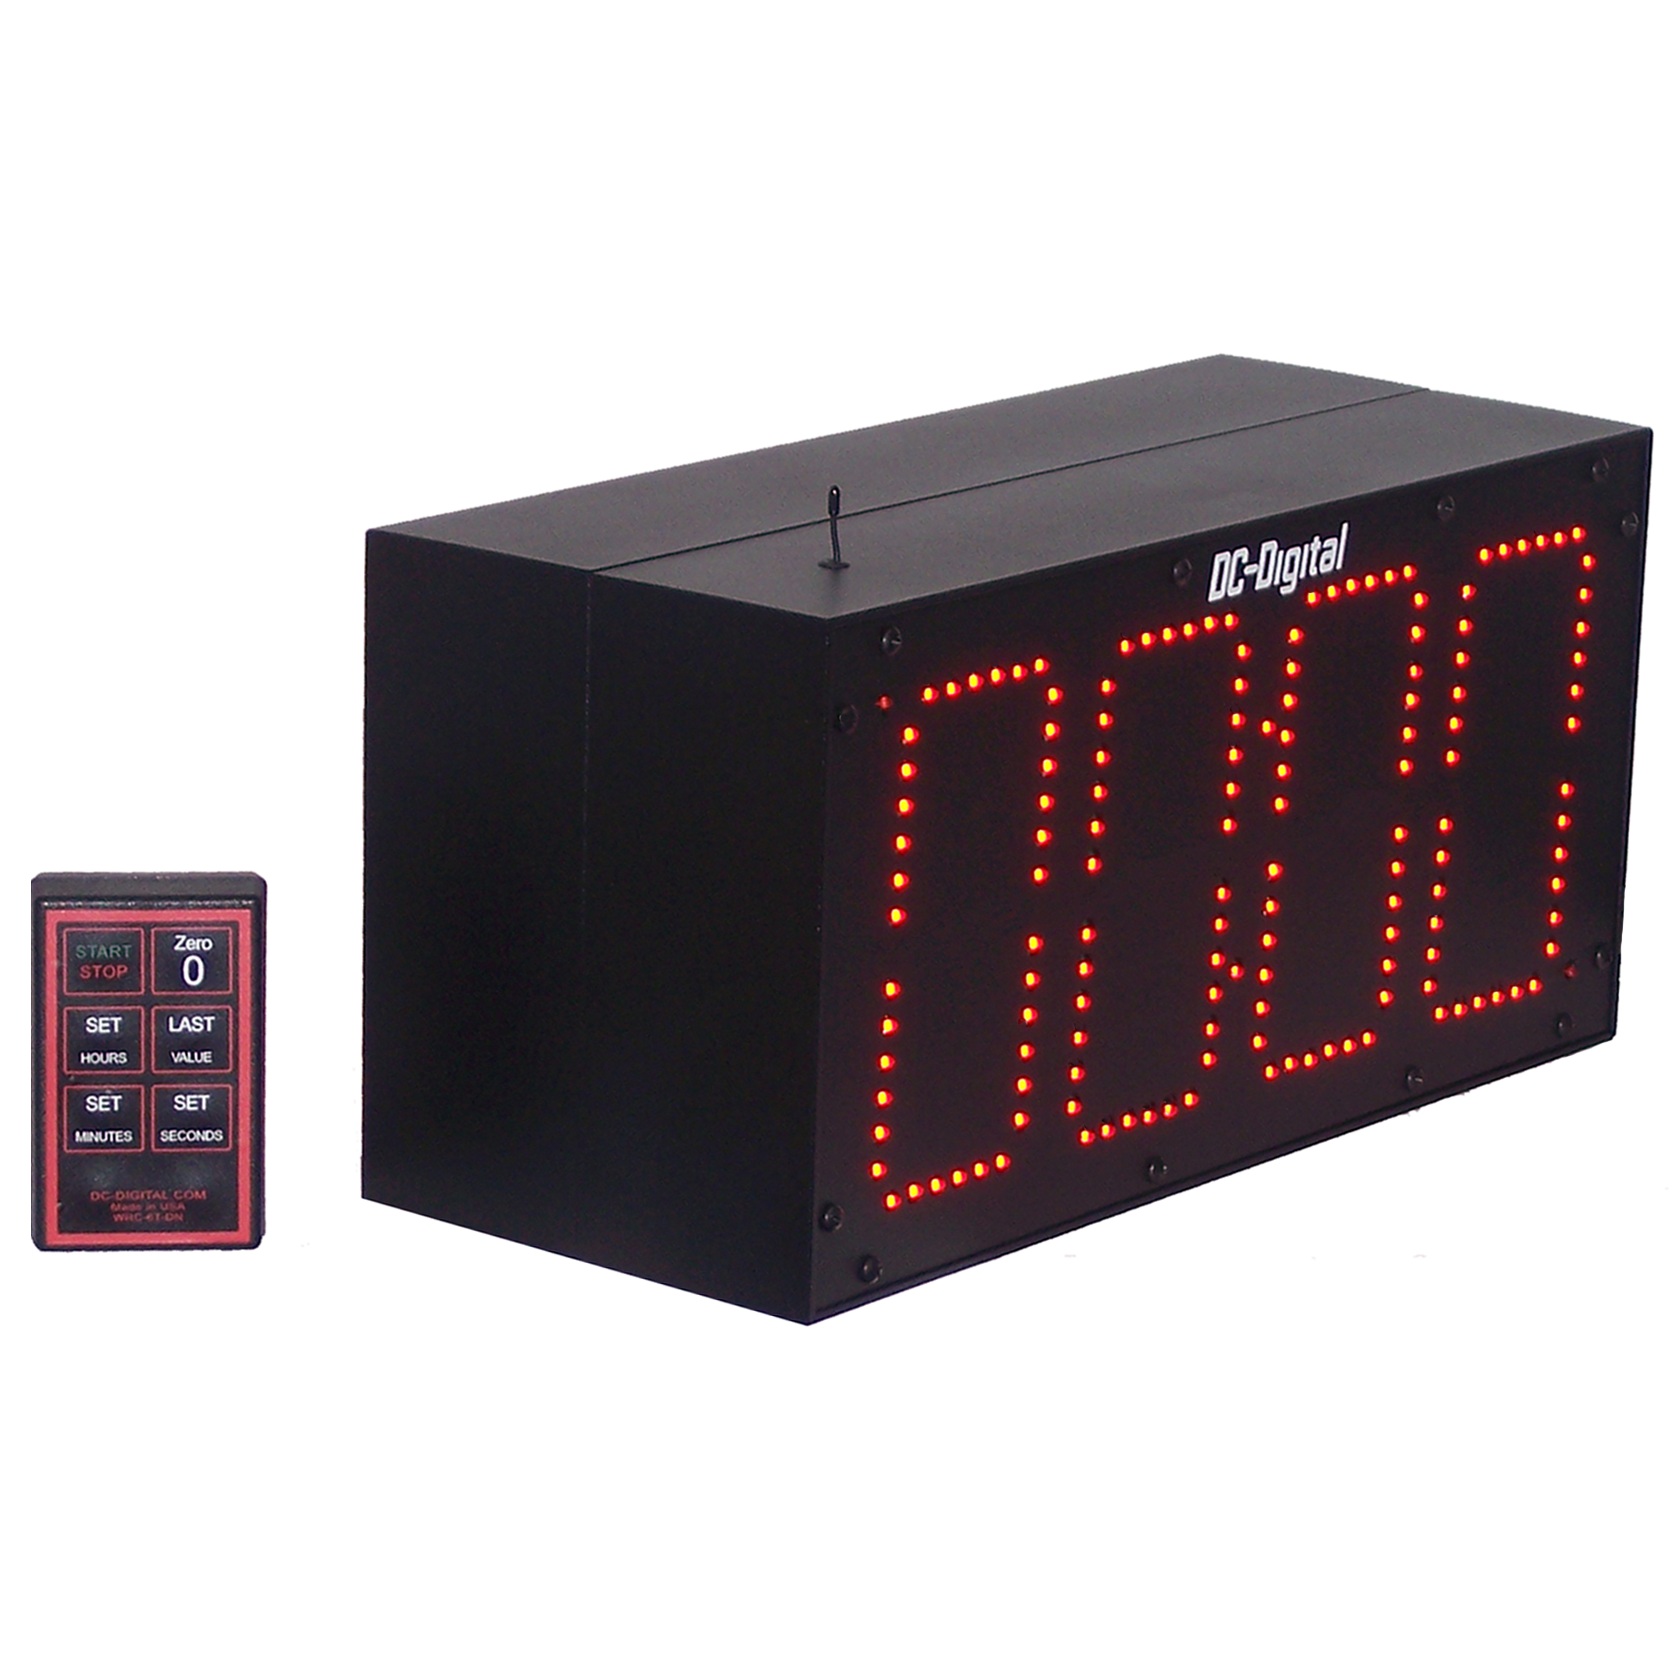 Double Sided Speech Conference, session clock timer, countdown wireless rf controls, all aluminum enclosure